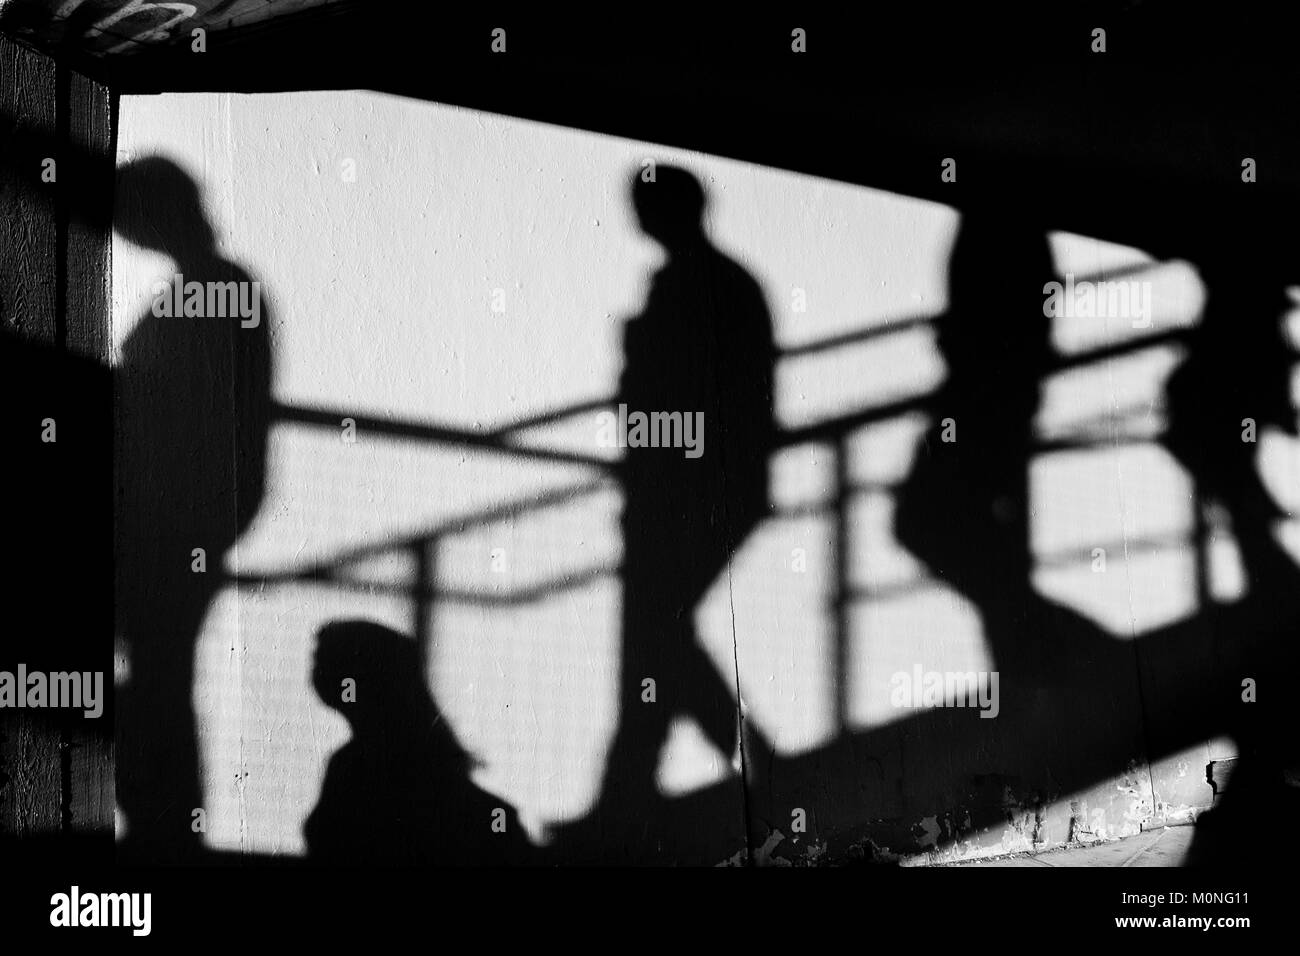 London Black and white street photography: Shadows of people descending stairs. Stock Photo